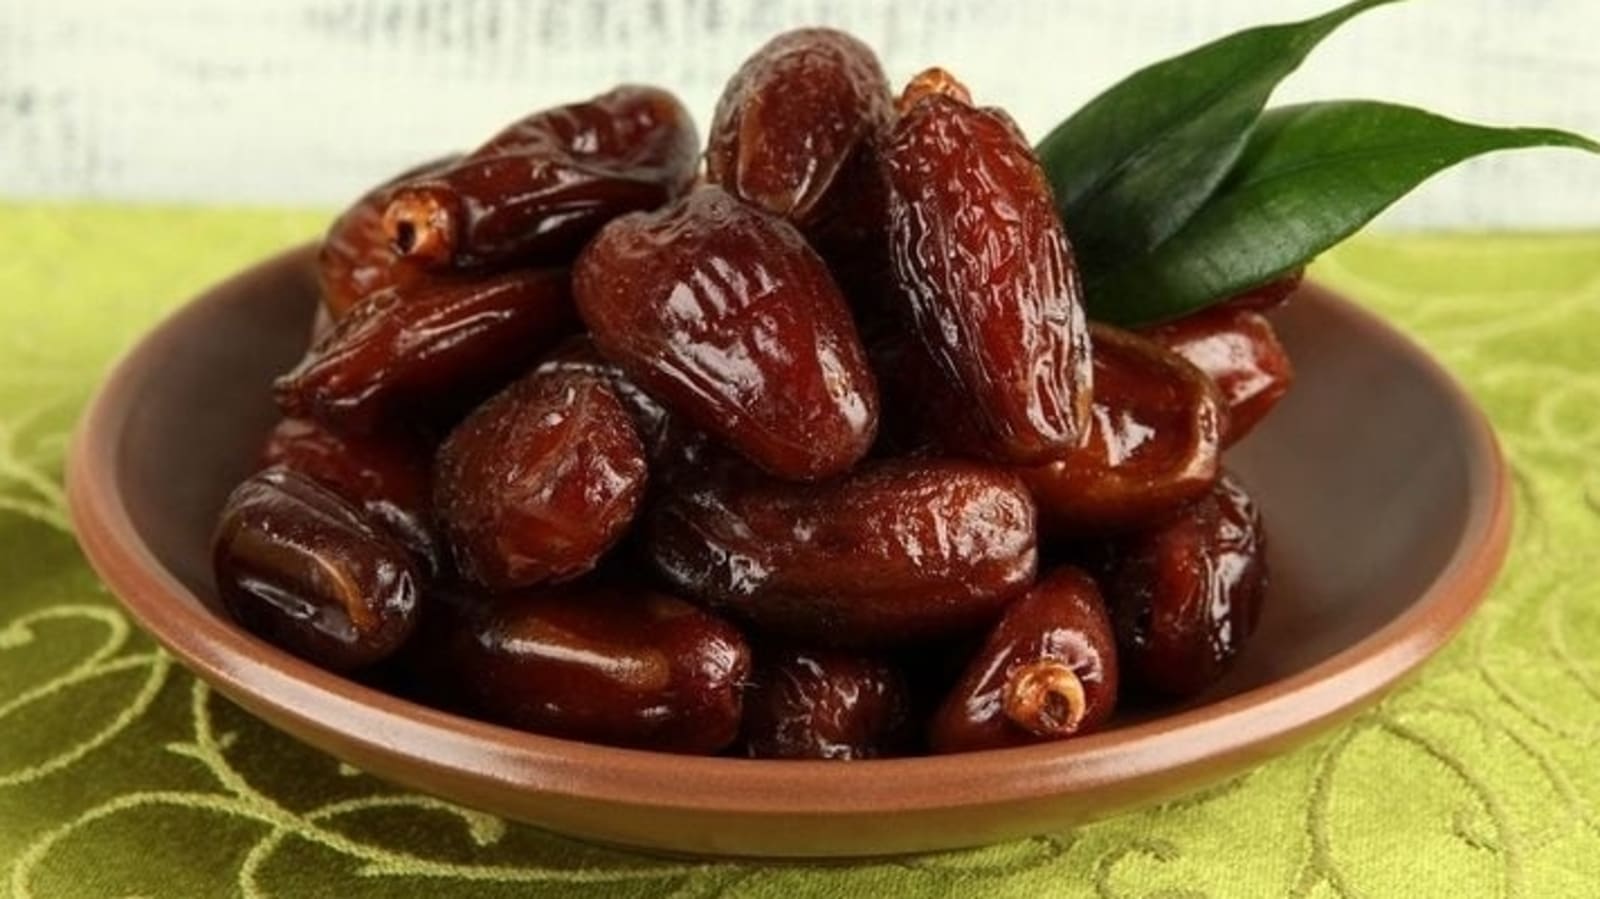 7 Benefits Of Dry Dates For Health  Their Nutritional Value  Health facts  food Food health benefits Fruit benefits